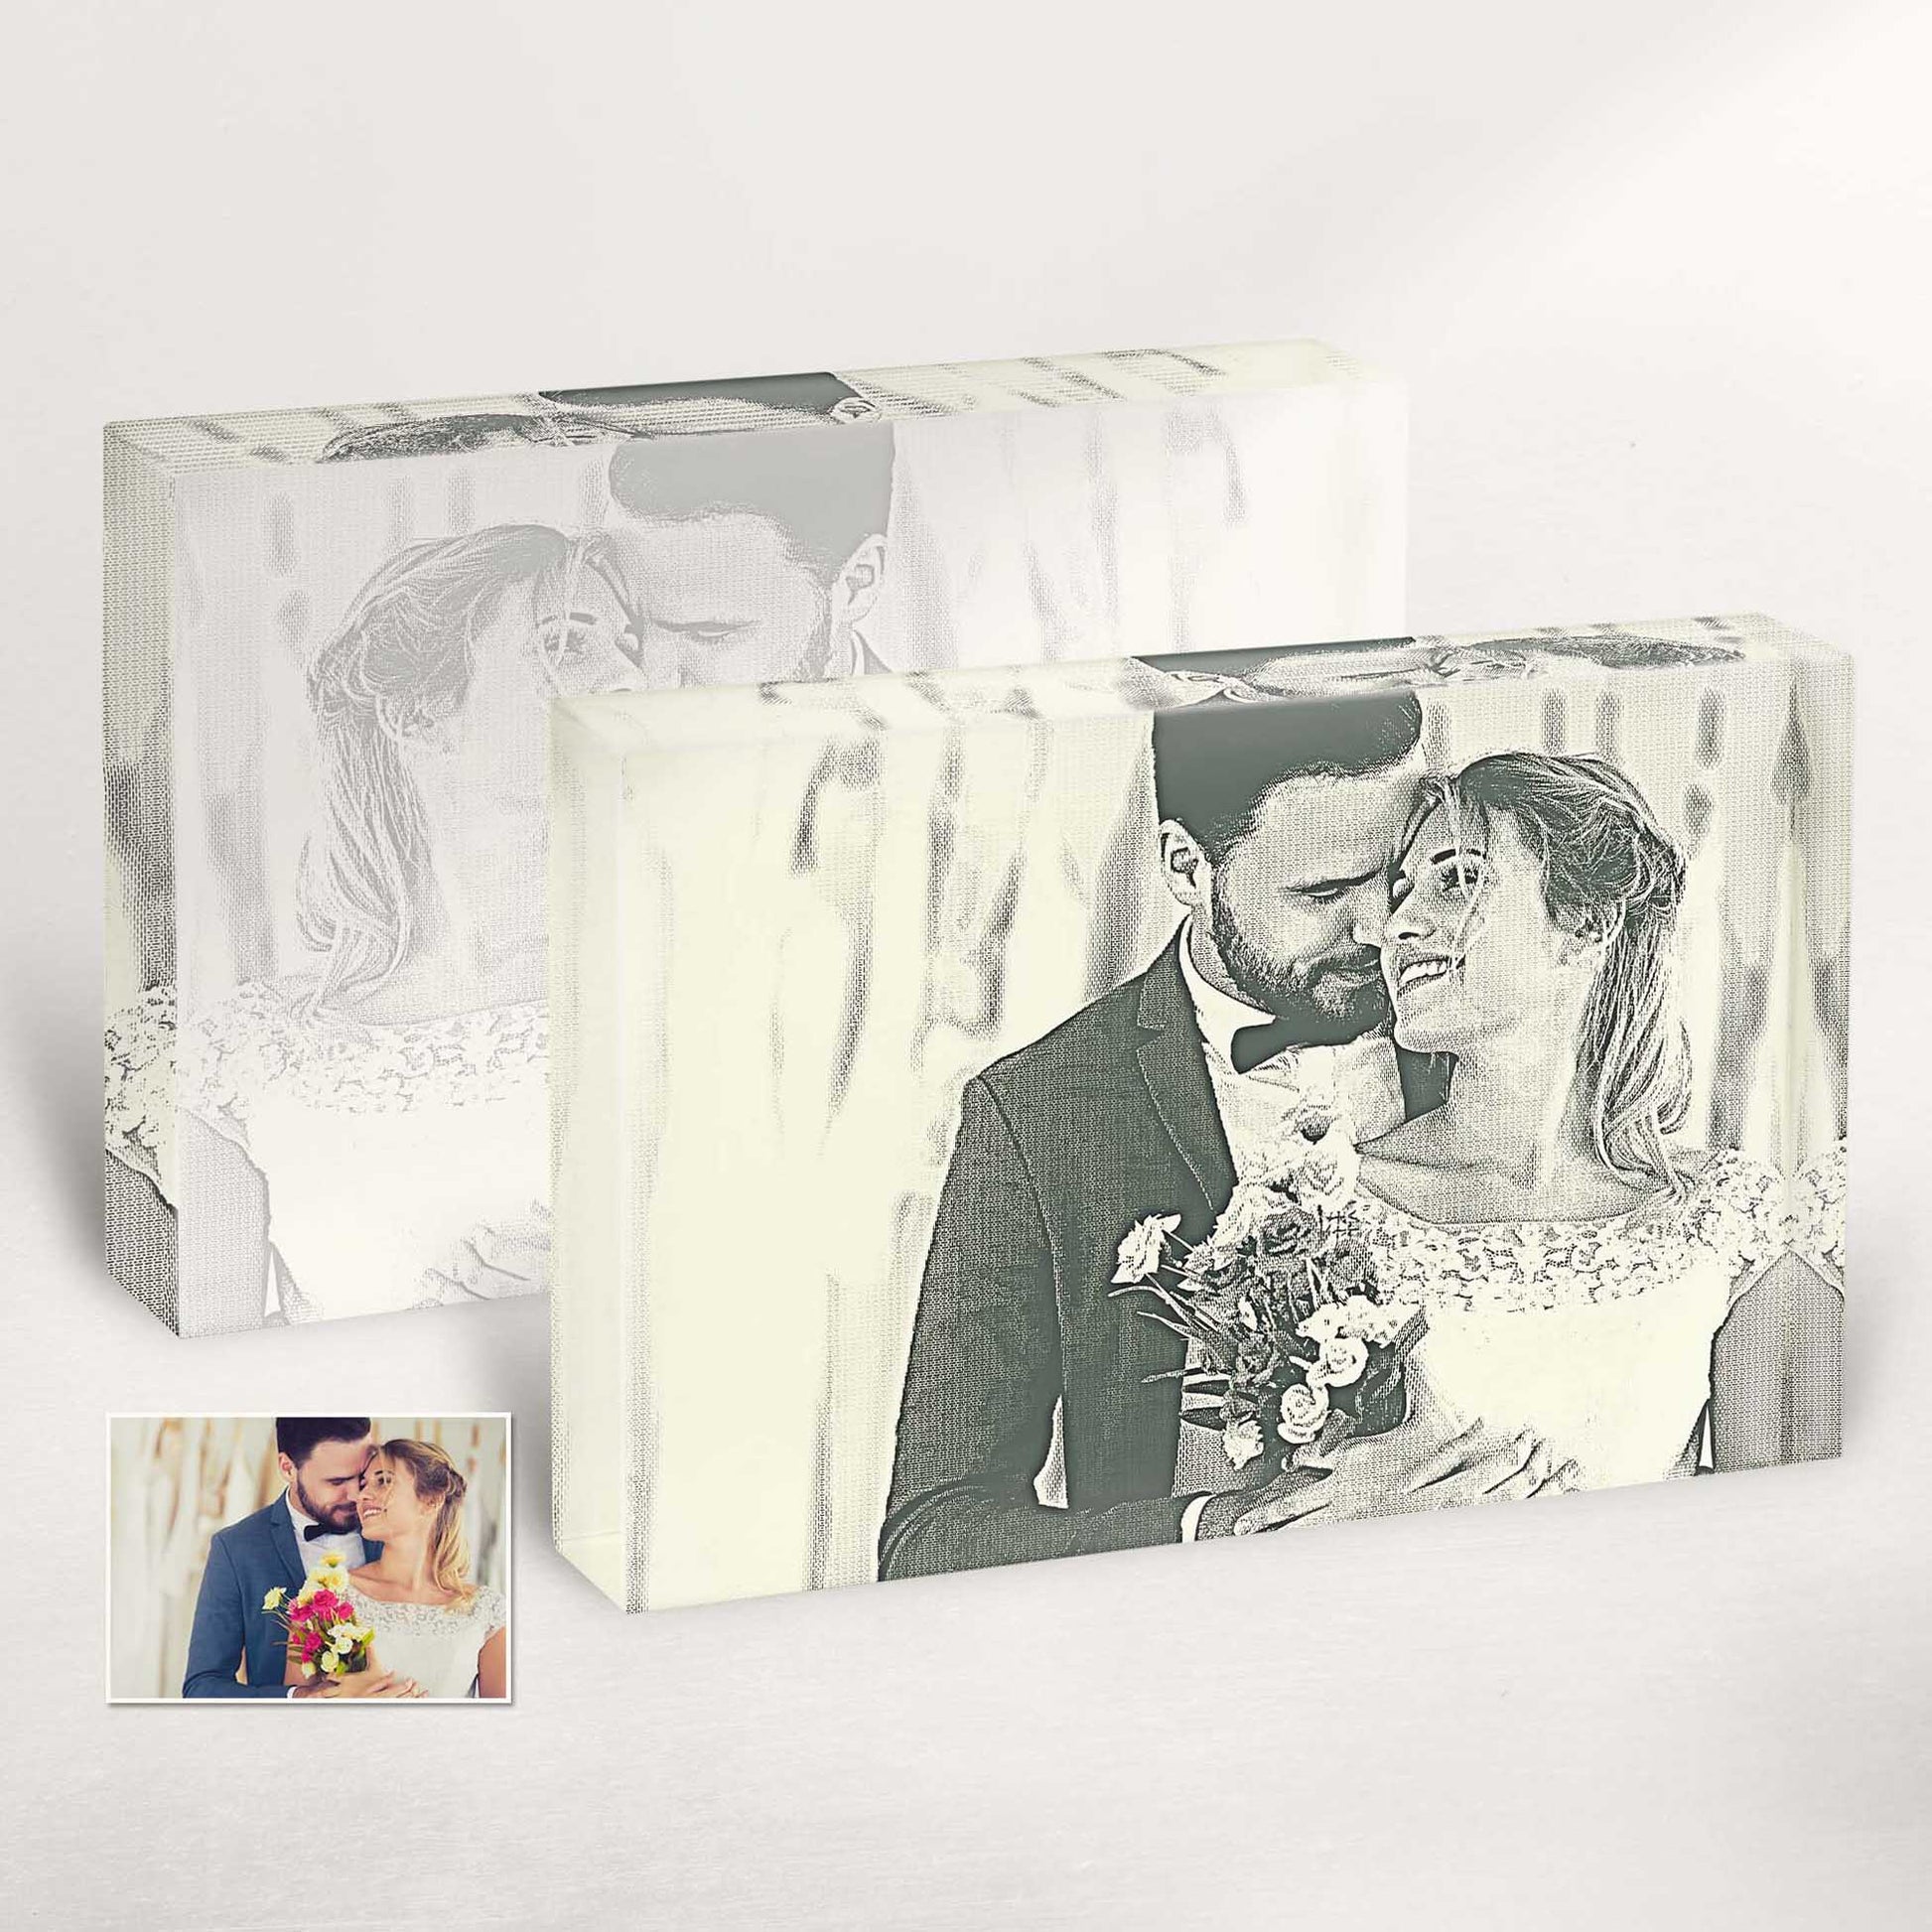 Make a statement with our personalised Money Engraved Acrylic Block Photo. The intricate engraving of money on the acrylic block creates a visually striking and unique gift, perfect for commemorating special moments